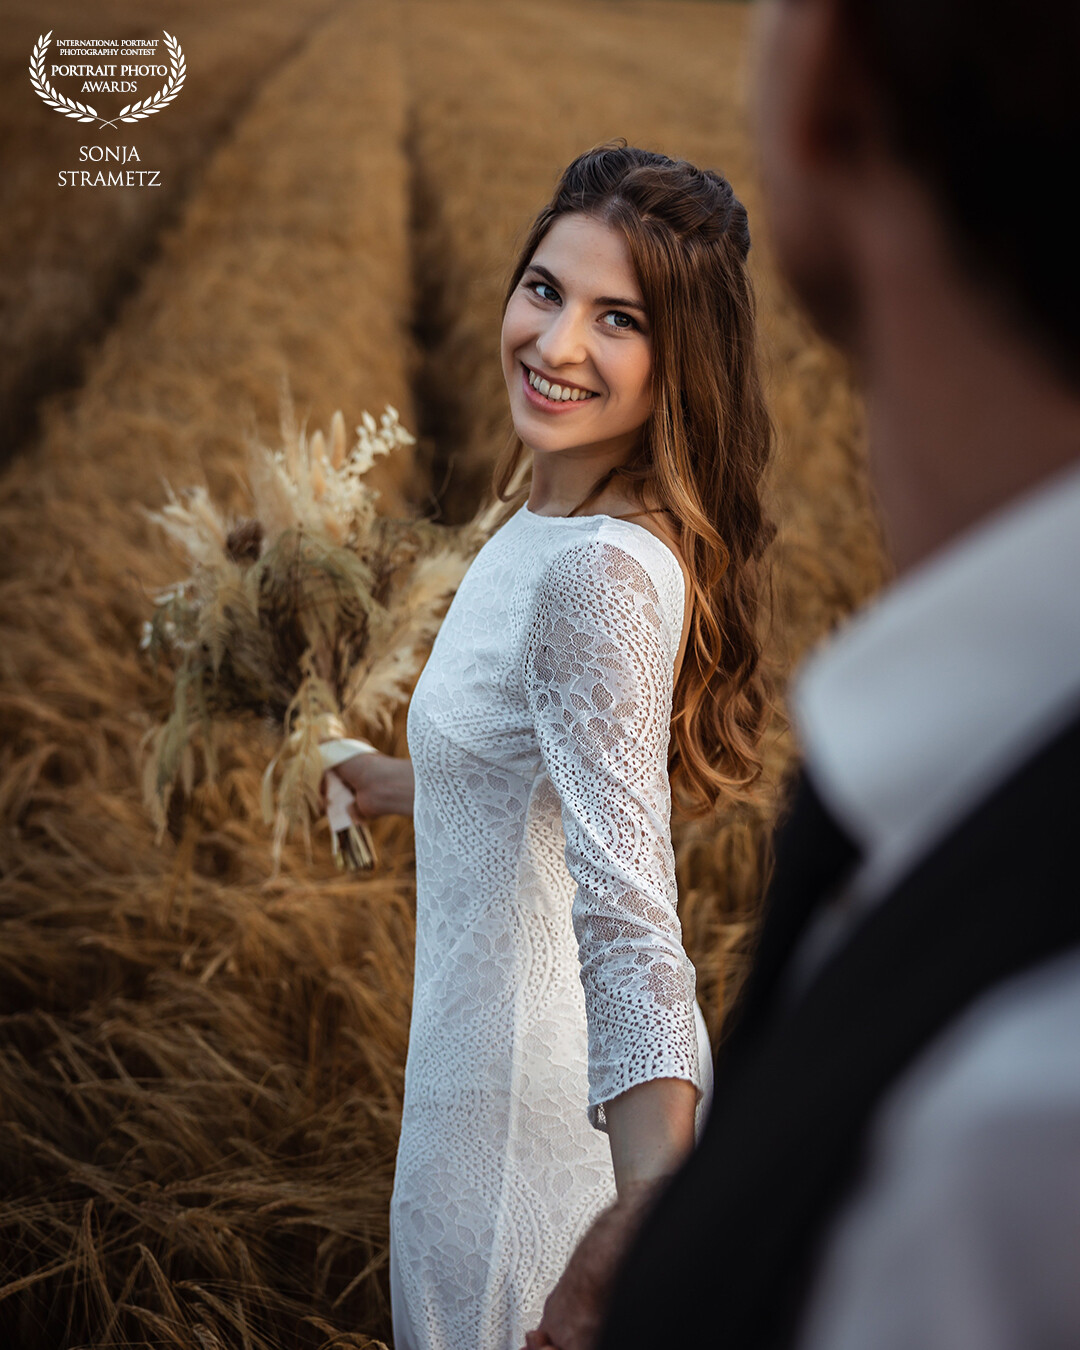 This two lovebirds were absolutely gorgeous during this session. Perfect light and the corn field made a beautiful contrast with the white dress.